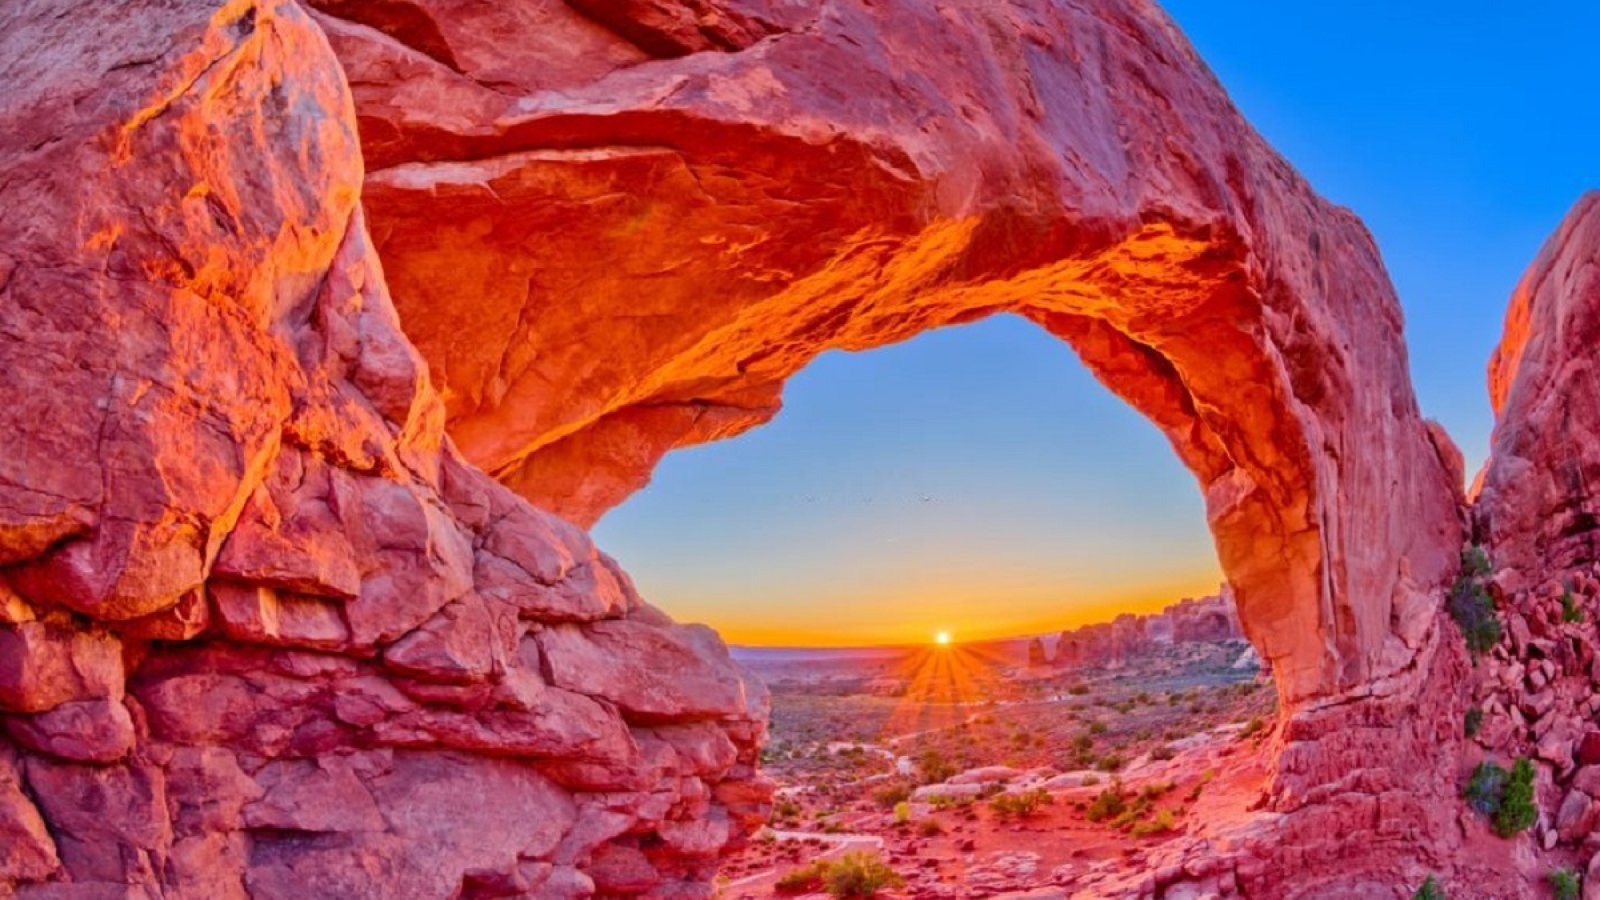 Arches National Park Vacation Travel Guide Best Things To Do In Arches National Park